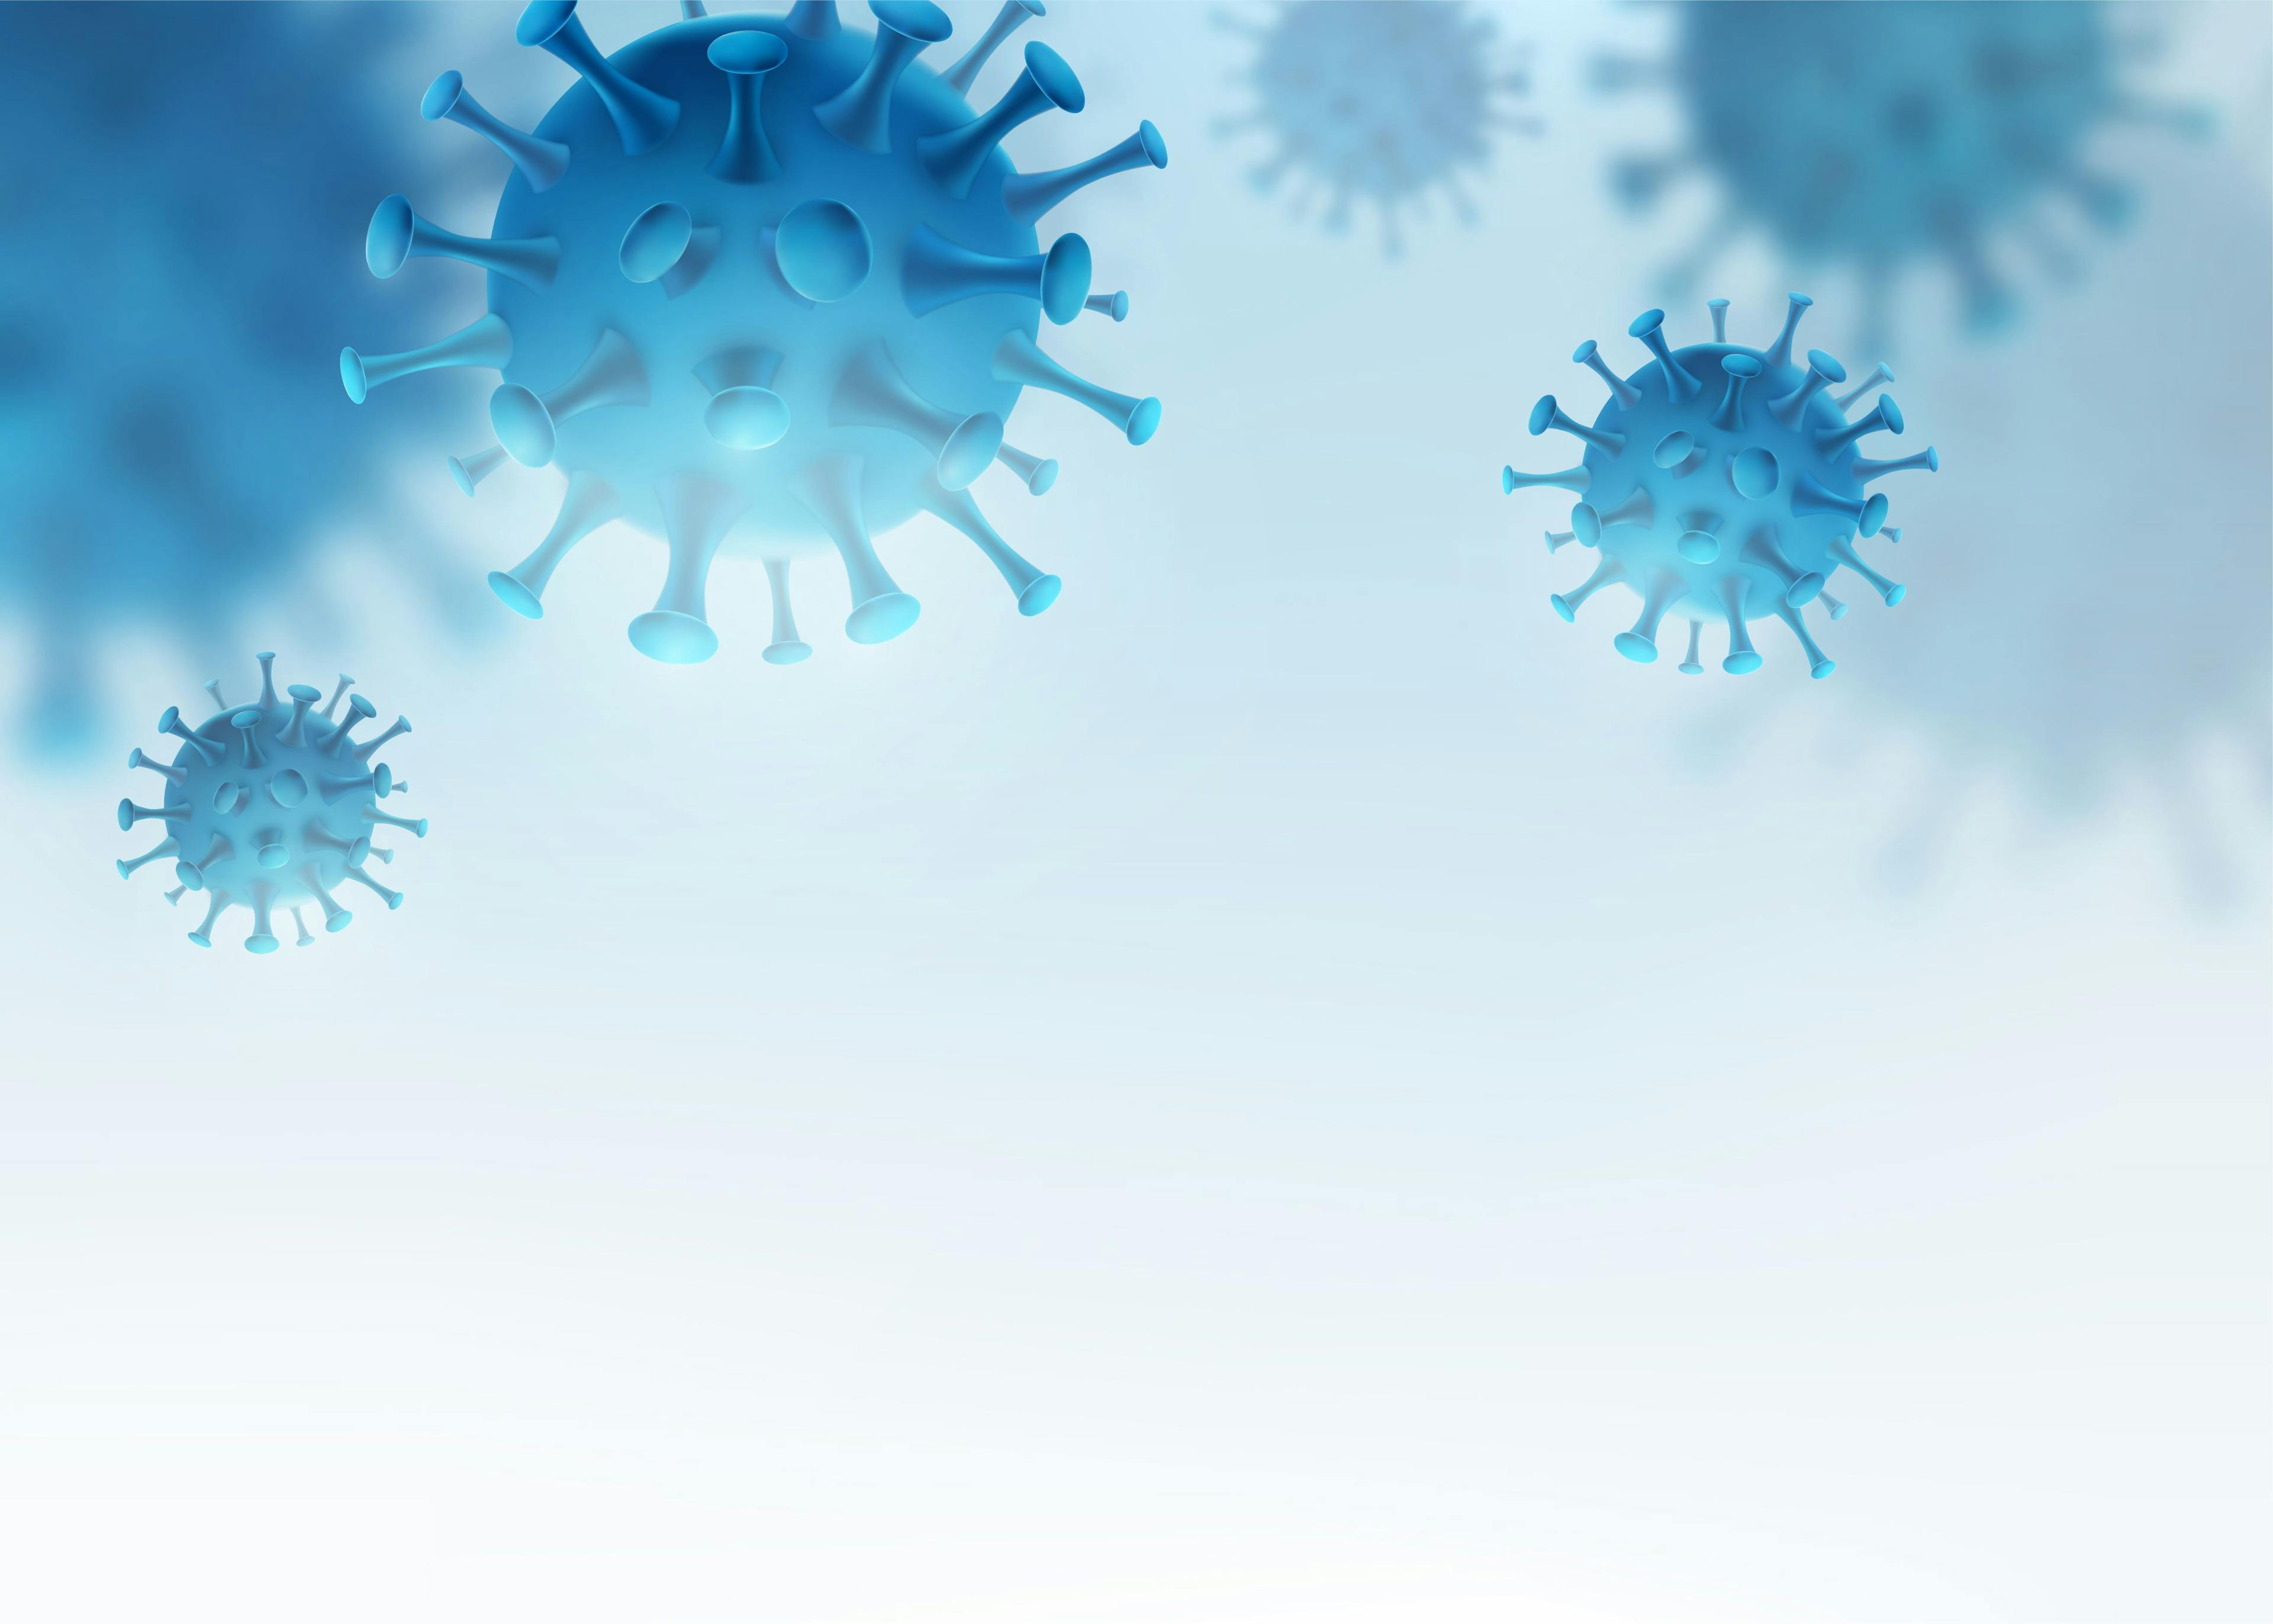 Virus, bacteria vector background. Cells disease outbreak. Coronavirus alert pattern. Microbiology medical concept for banner, poster or flyer with copy space at the down | Image Credit: © zaie - stock.adobe.com